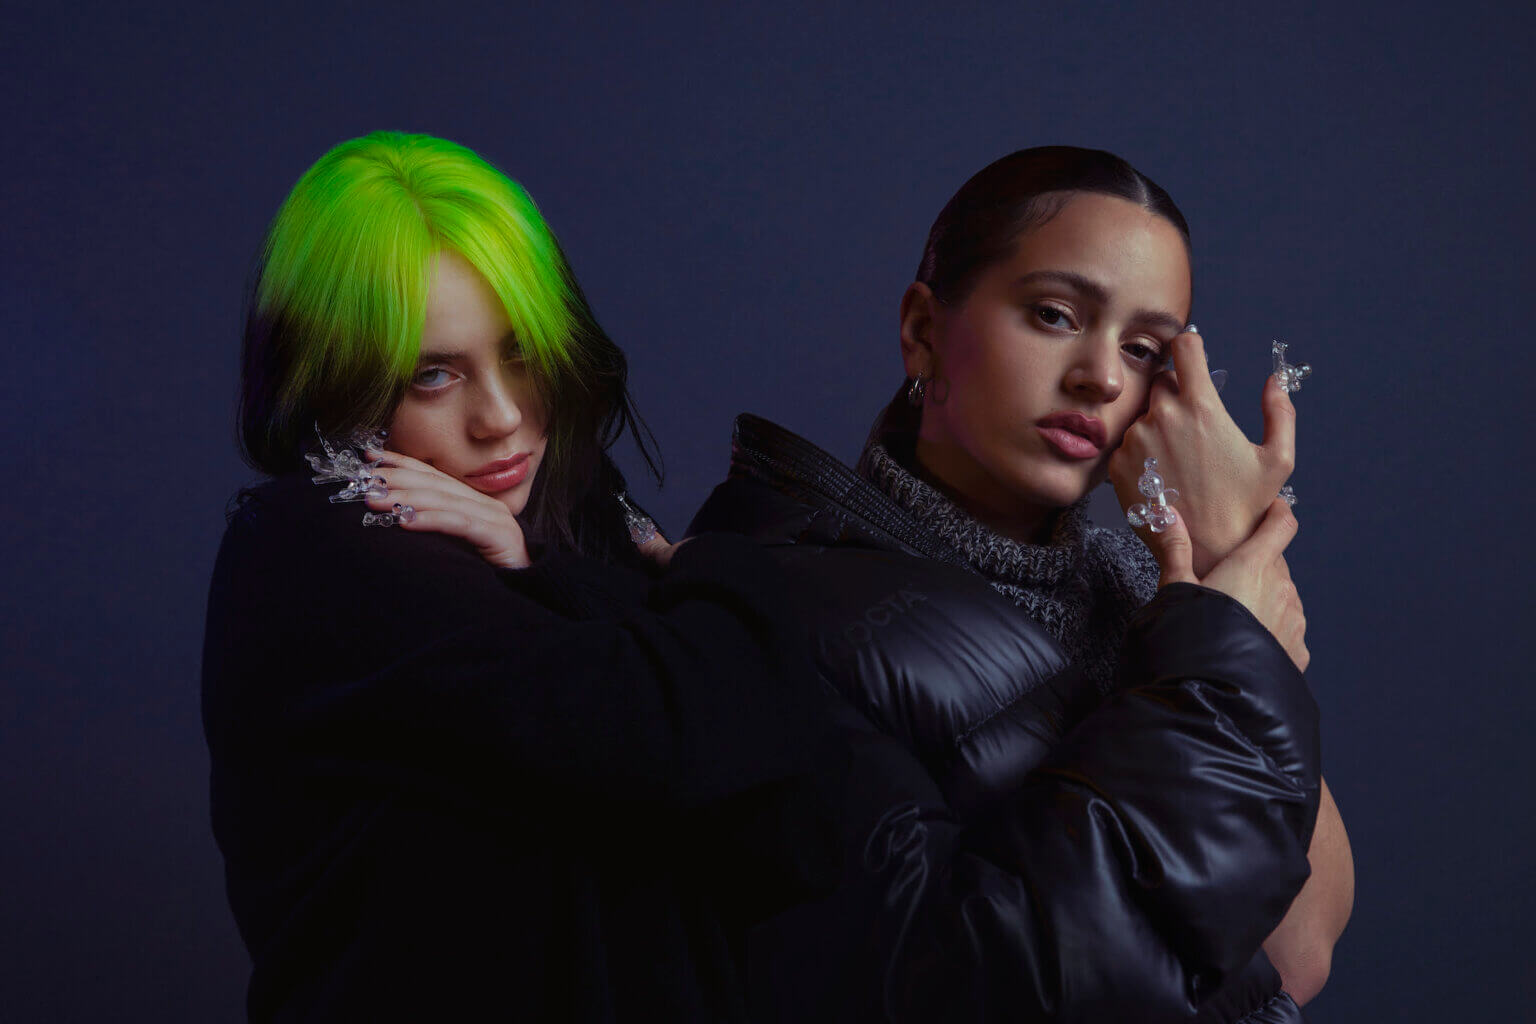 Billie Eilish & Rosalía have collaborated on "Lo Vas A Olvidar." The track is available to stream on all platforms